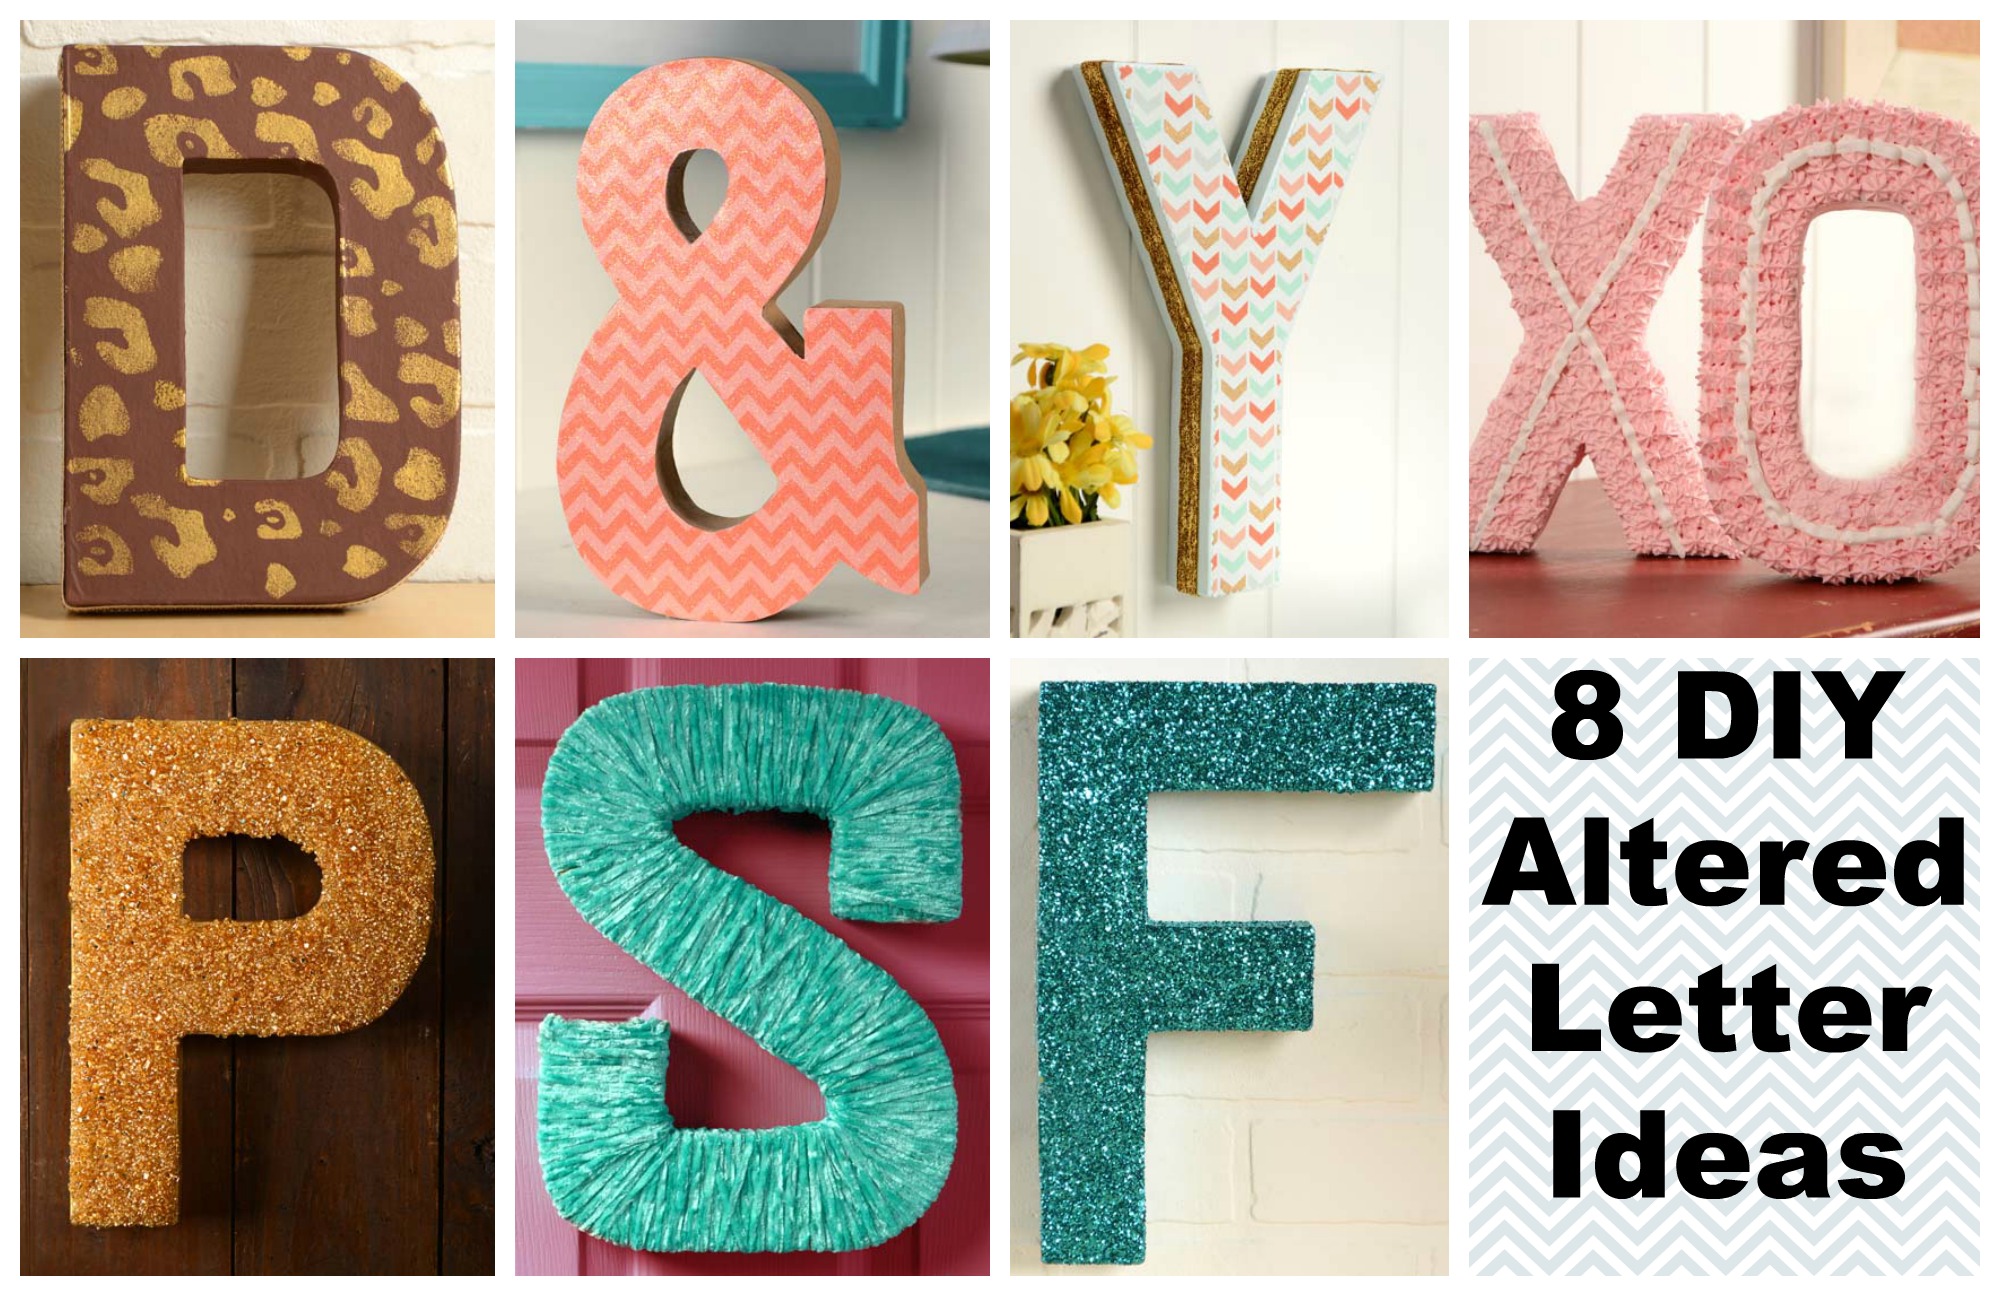 Make it with Mod Podge: 8 DIYs for Altered Letters